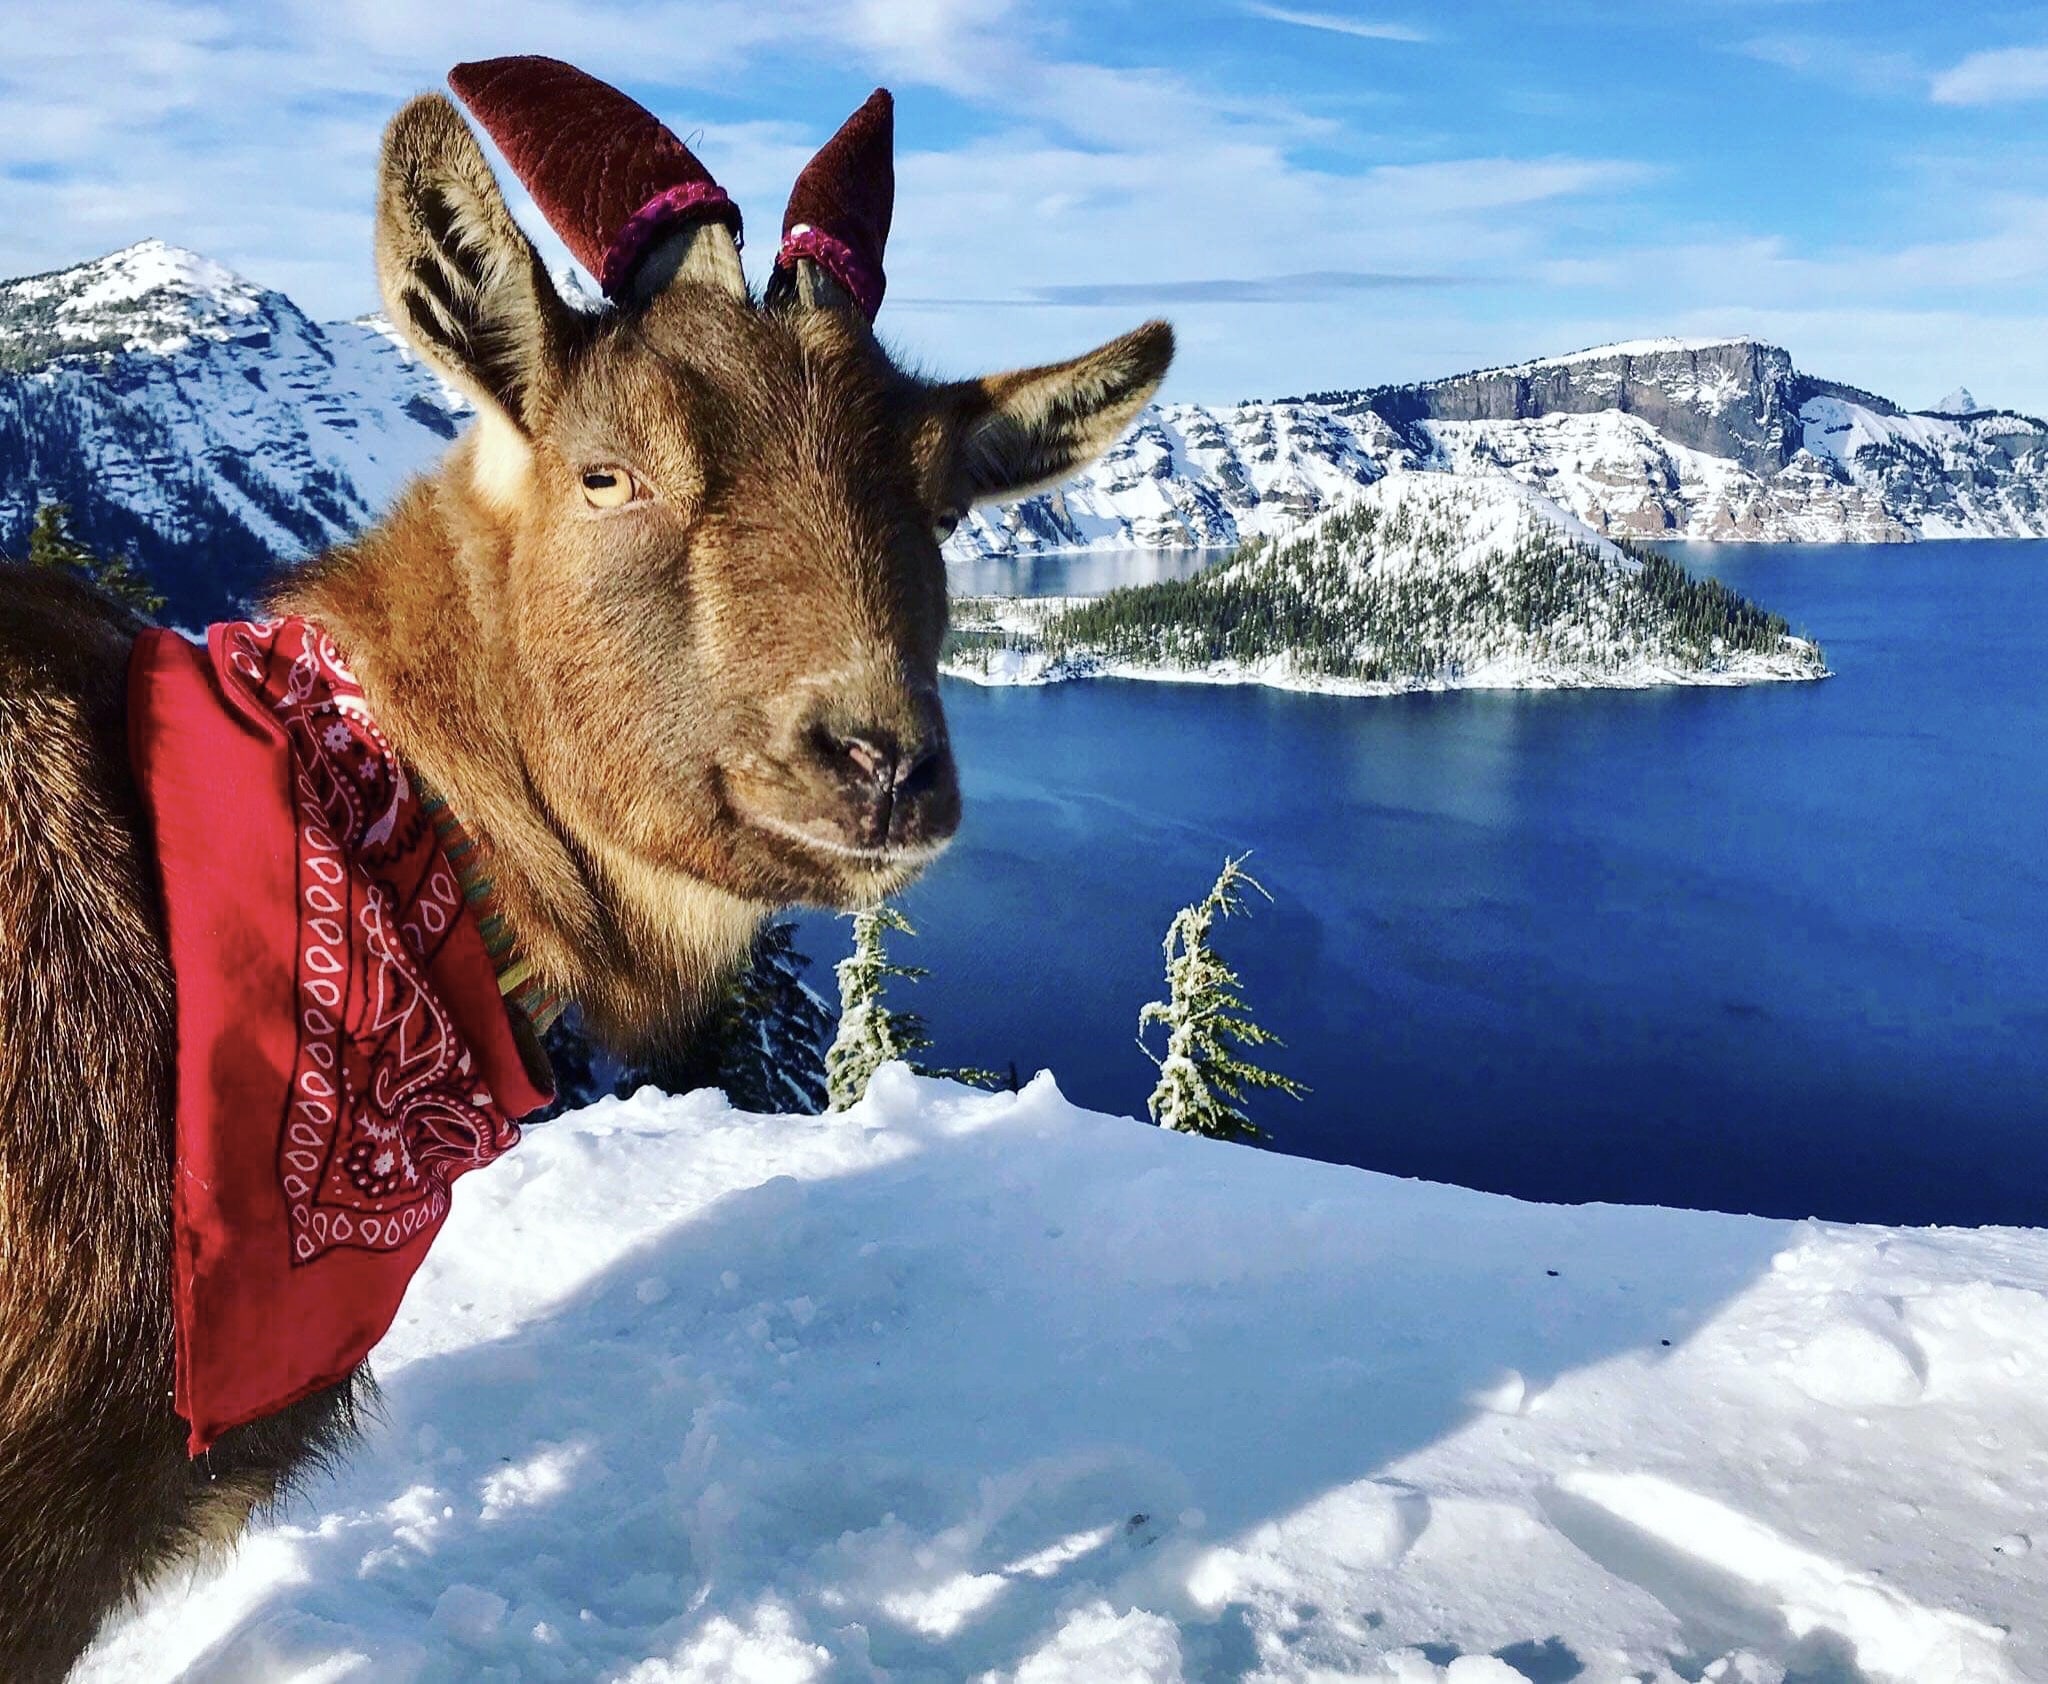 Goat wearing red bandana, looking at camera in front of snowy mountain